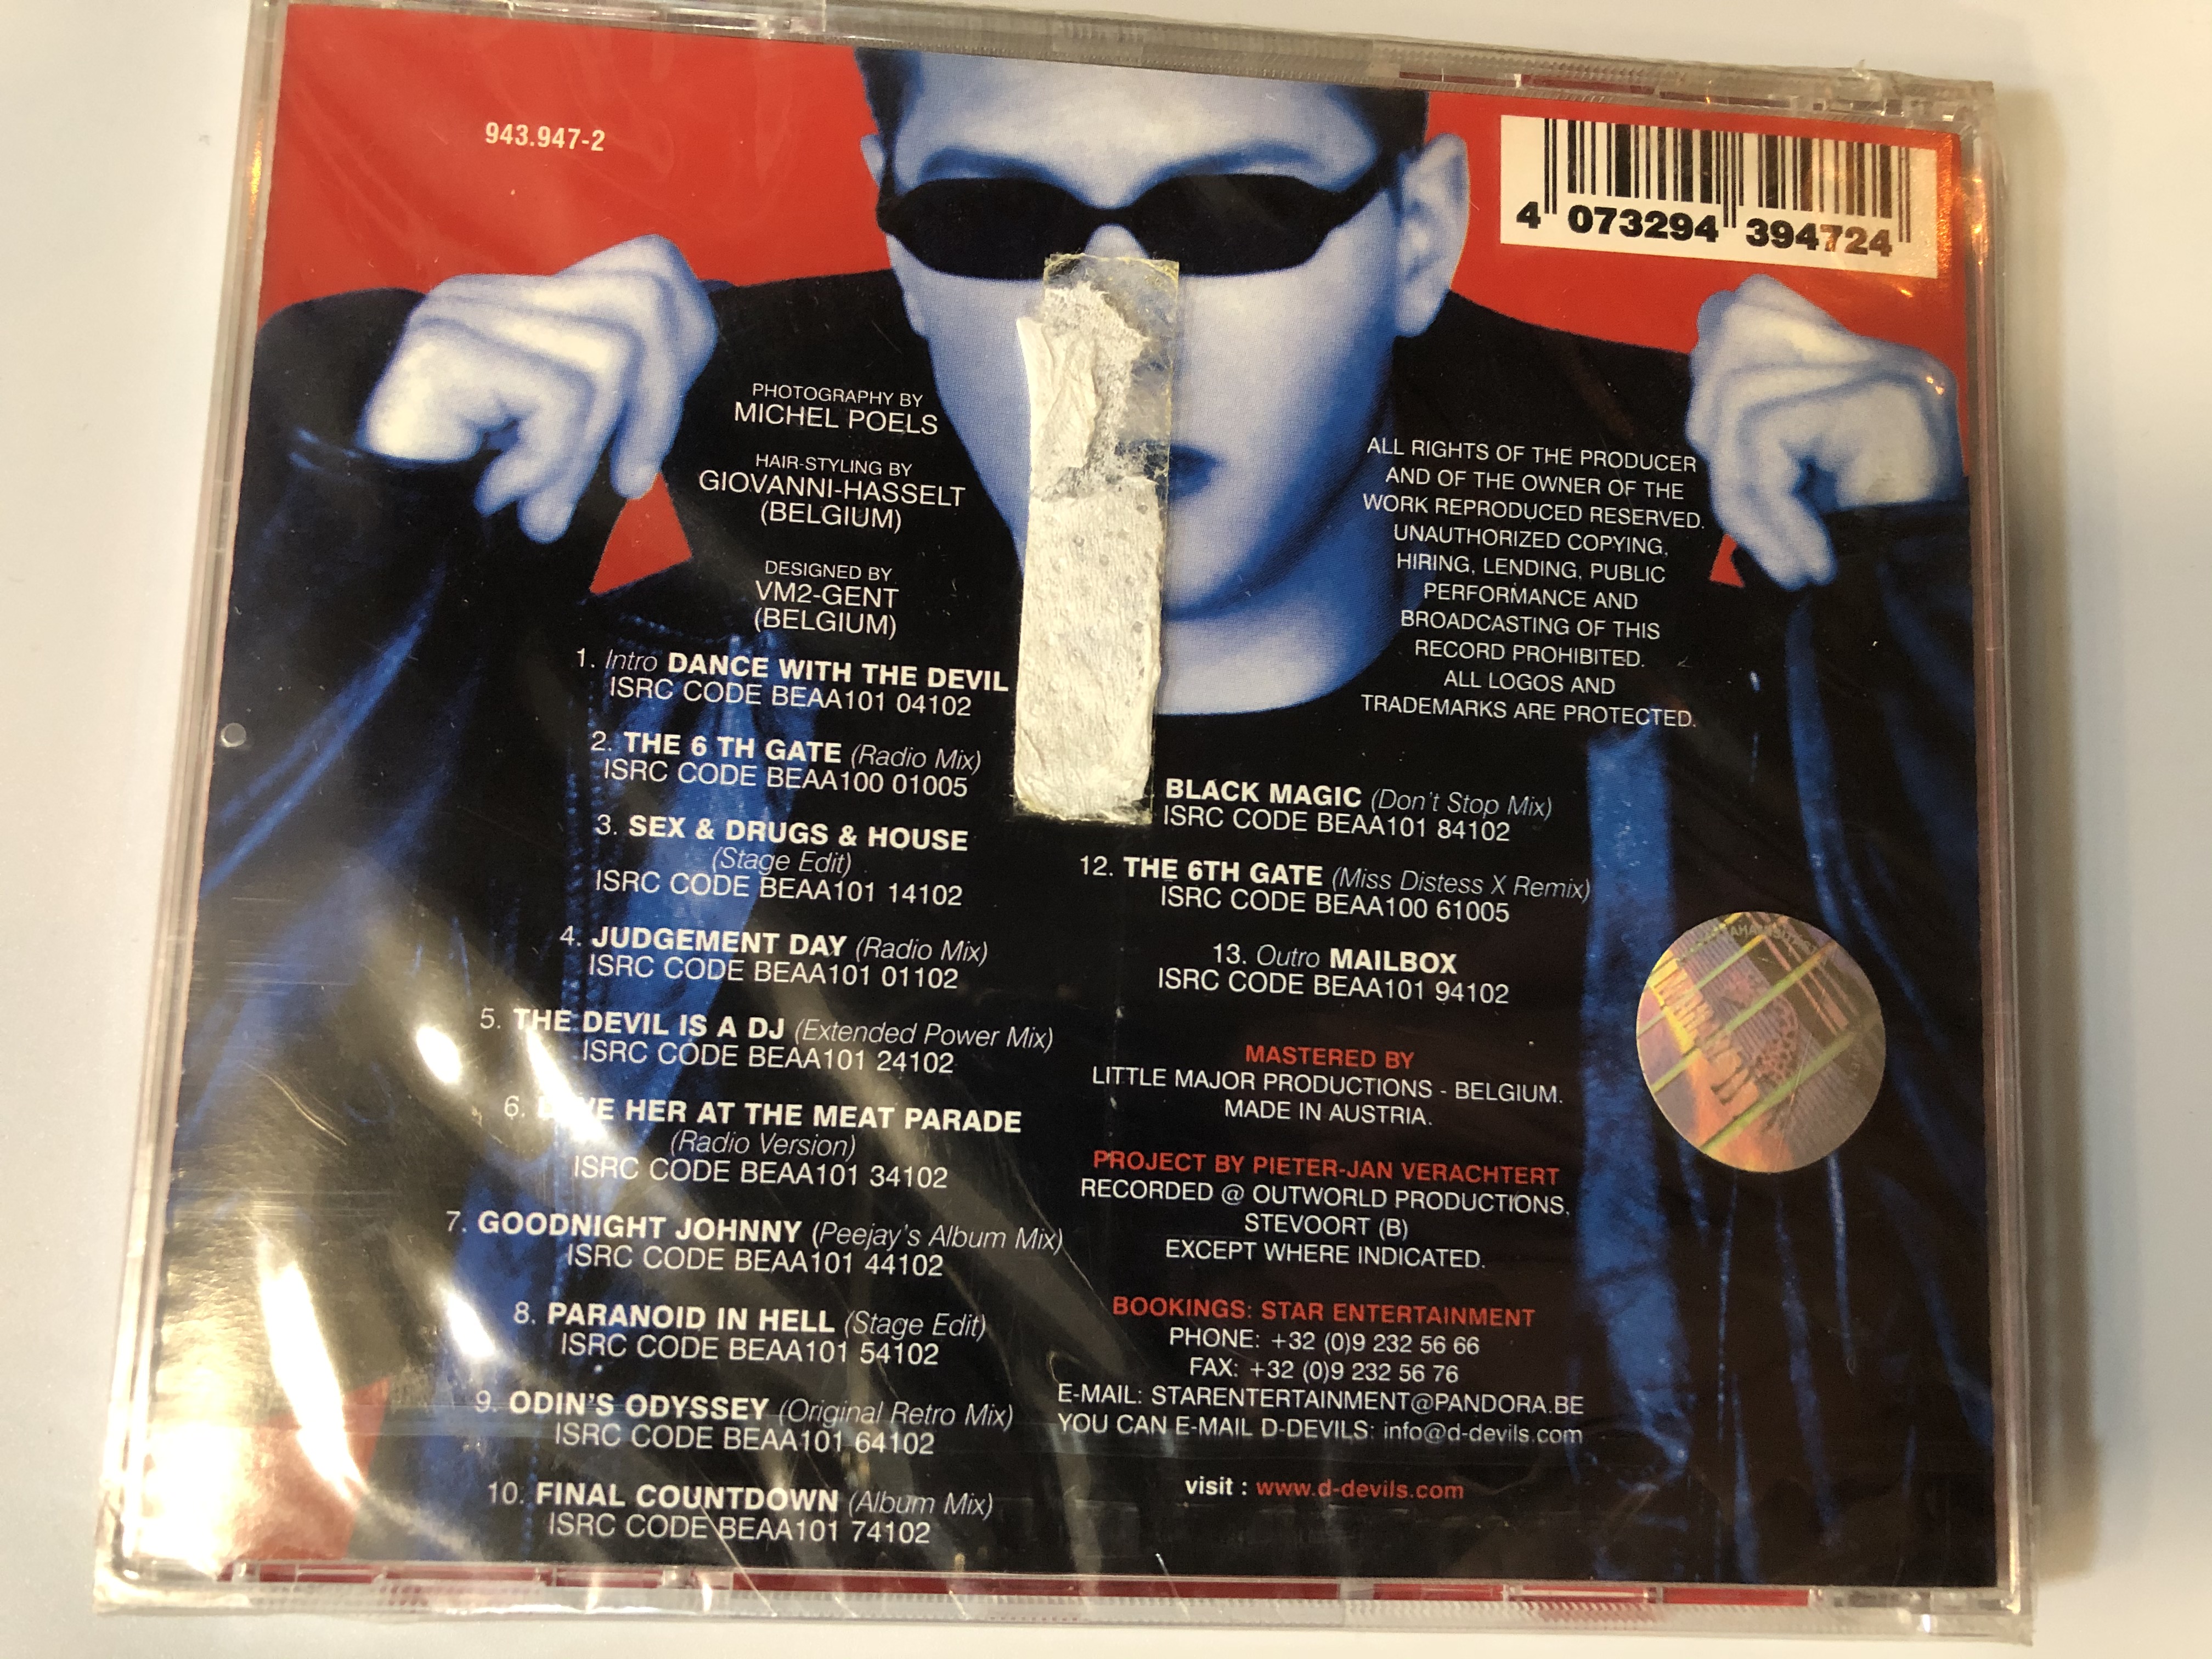 d-devils-dance-with-the-devil-record-express-audio-cd-2001-943-2-.jpg